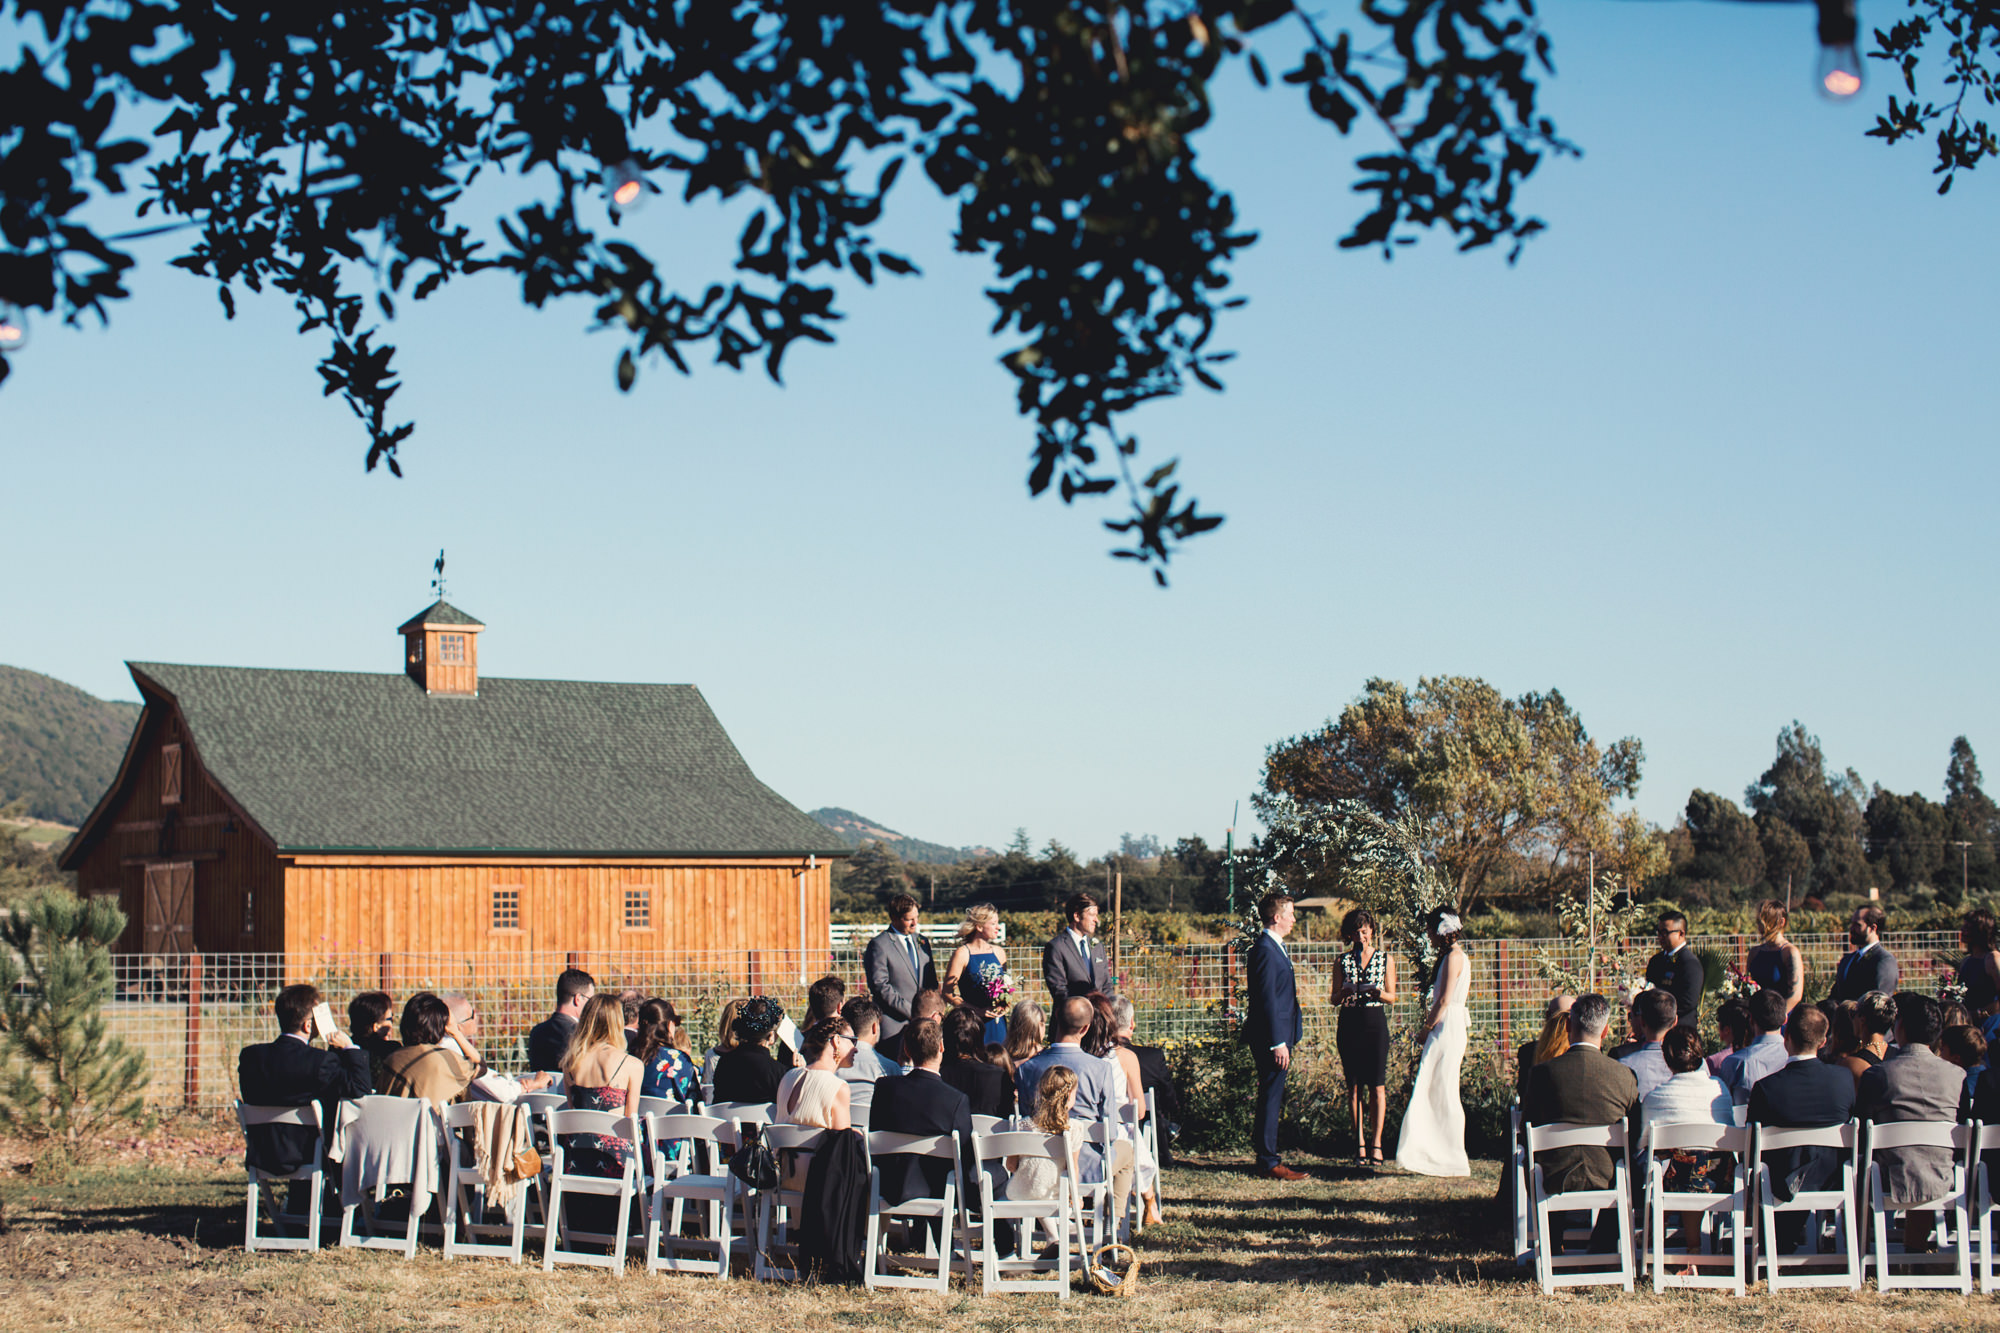 Private Residence Wedding in California ©Anne-Claire Brun 0008